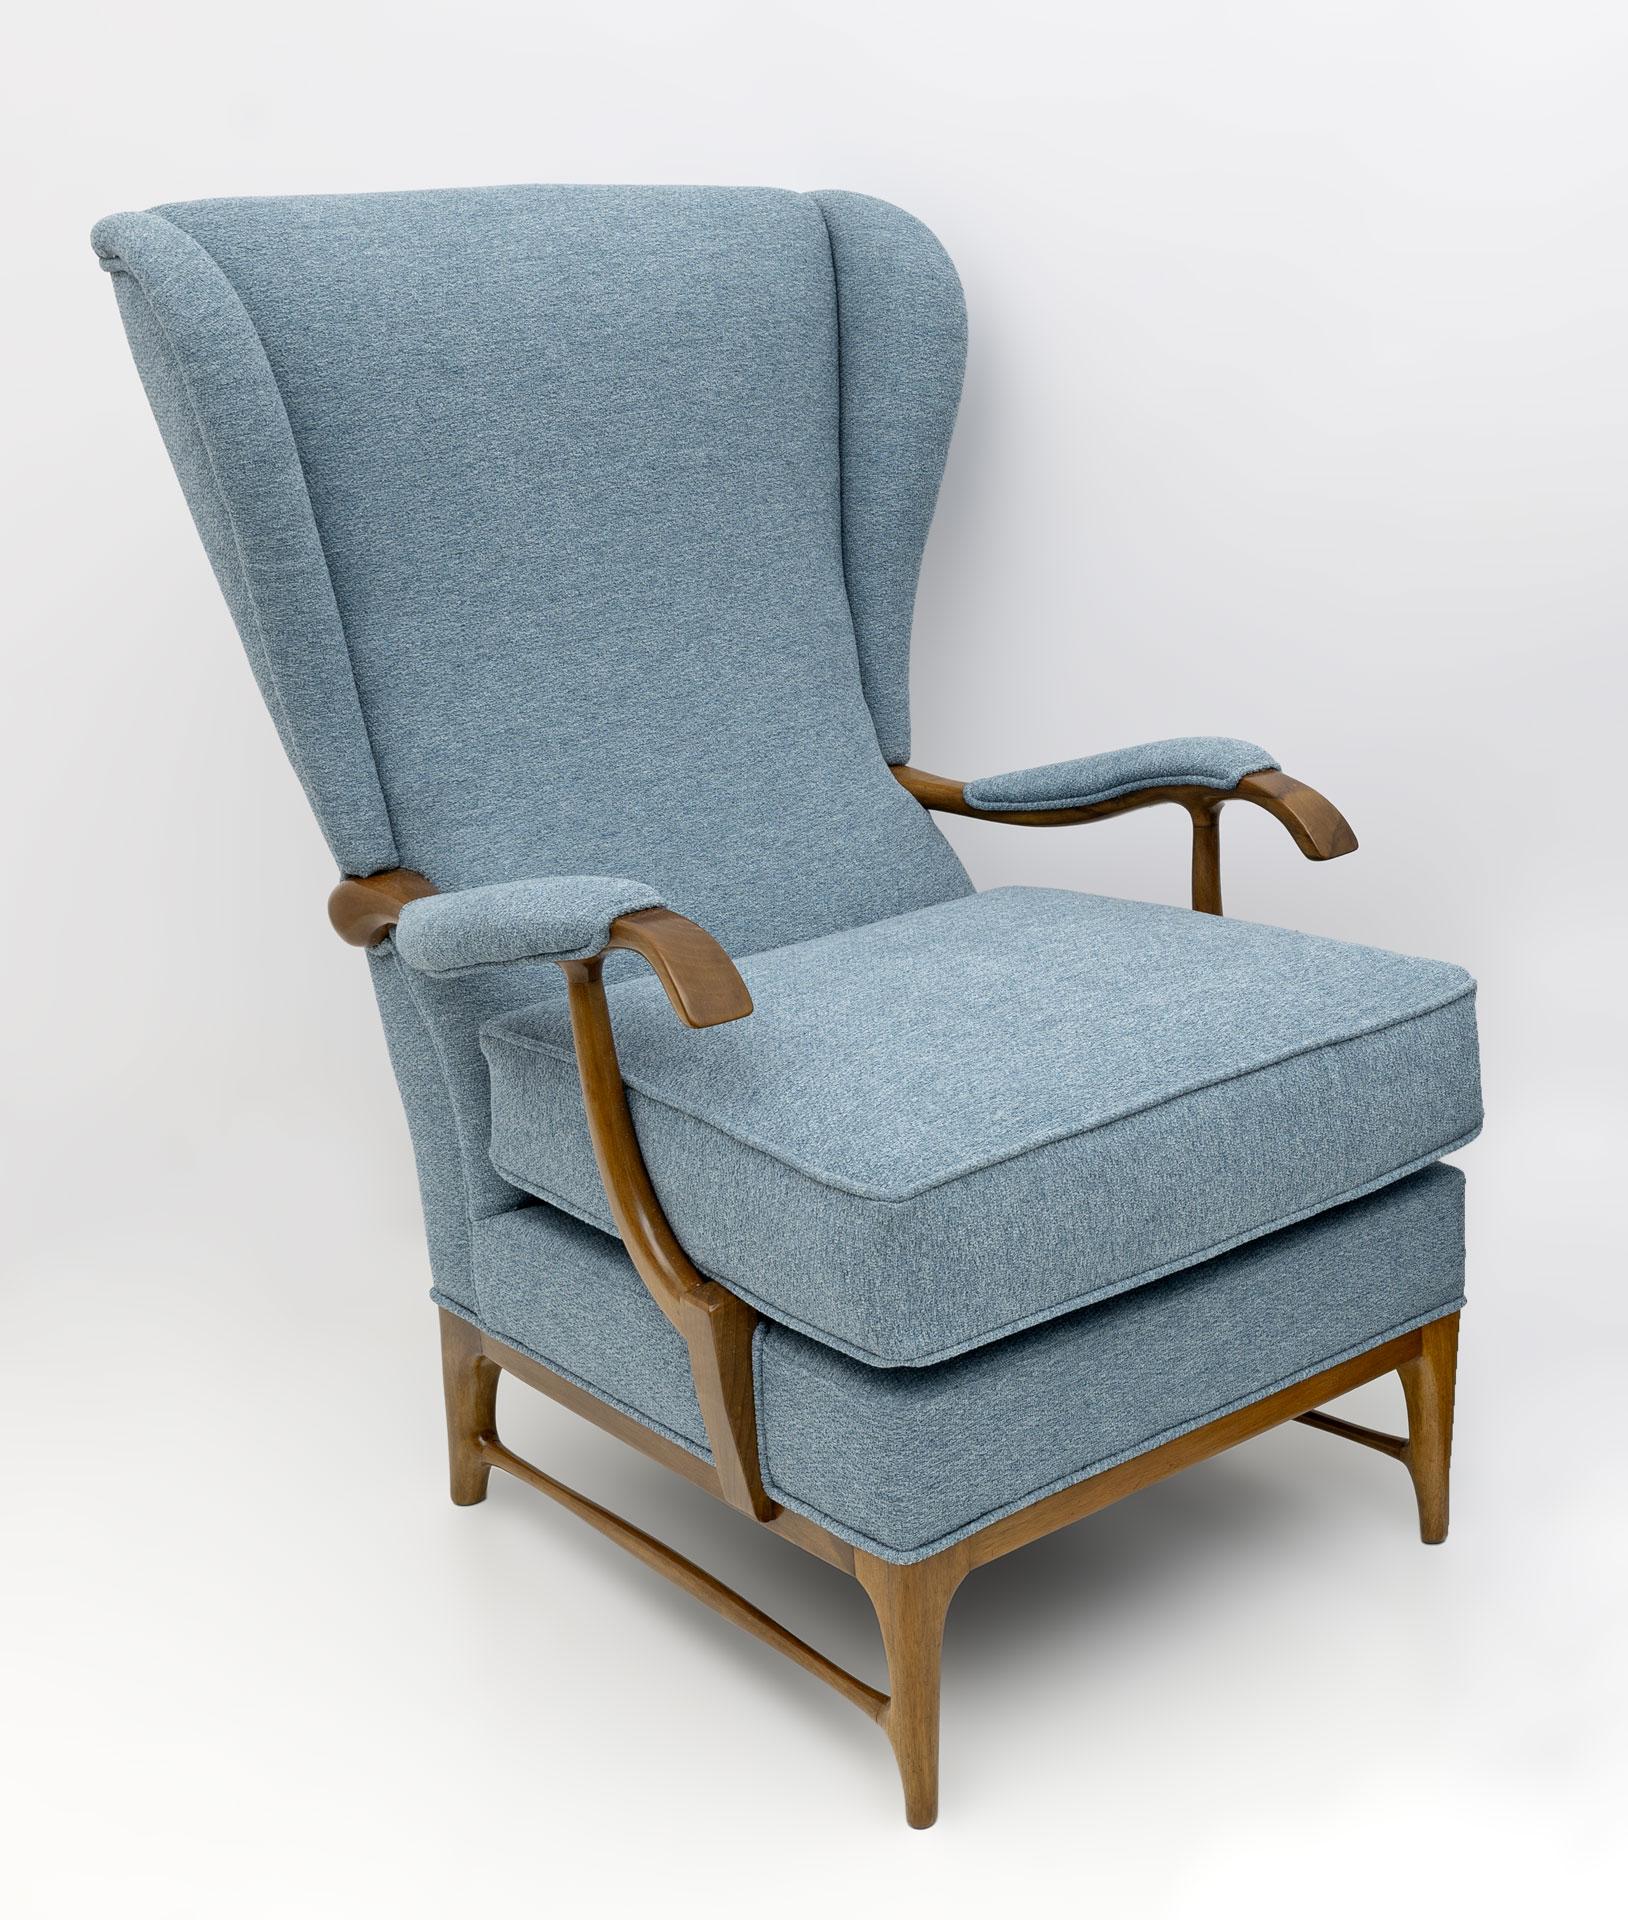 Pair of Wingback armchairs designed by Paolo Buffa and produced by Framar in the 1950s. The armchairs have been restored and upholstered with sugar paper-colored bouclé fabric. Paolo Buffa was an Italian designer and architect. He is one of the most